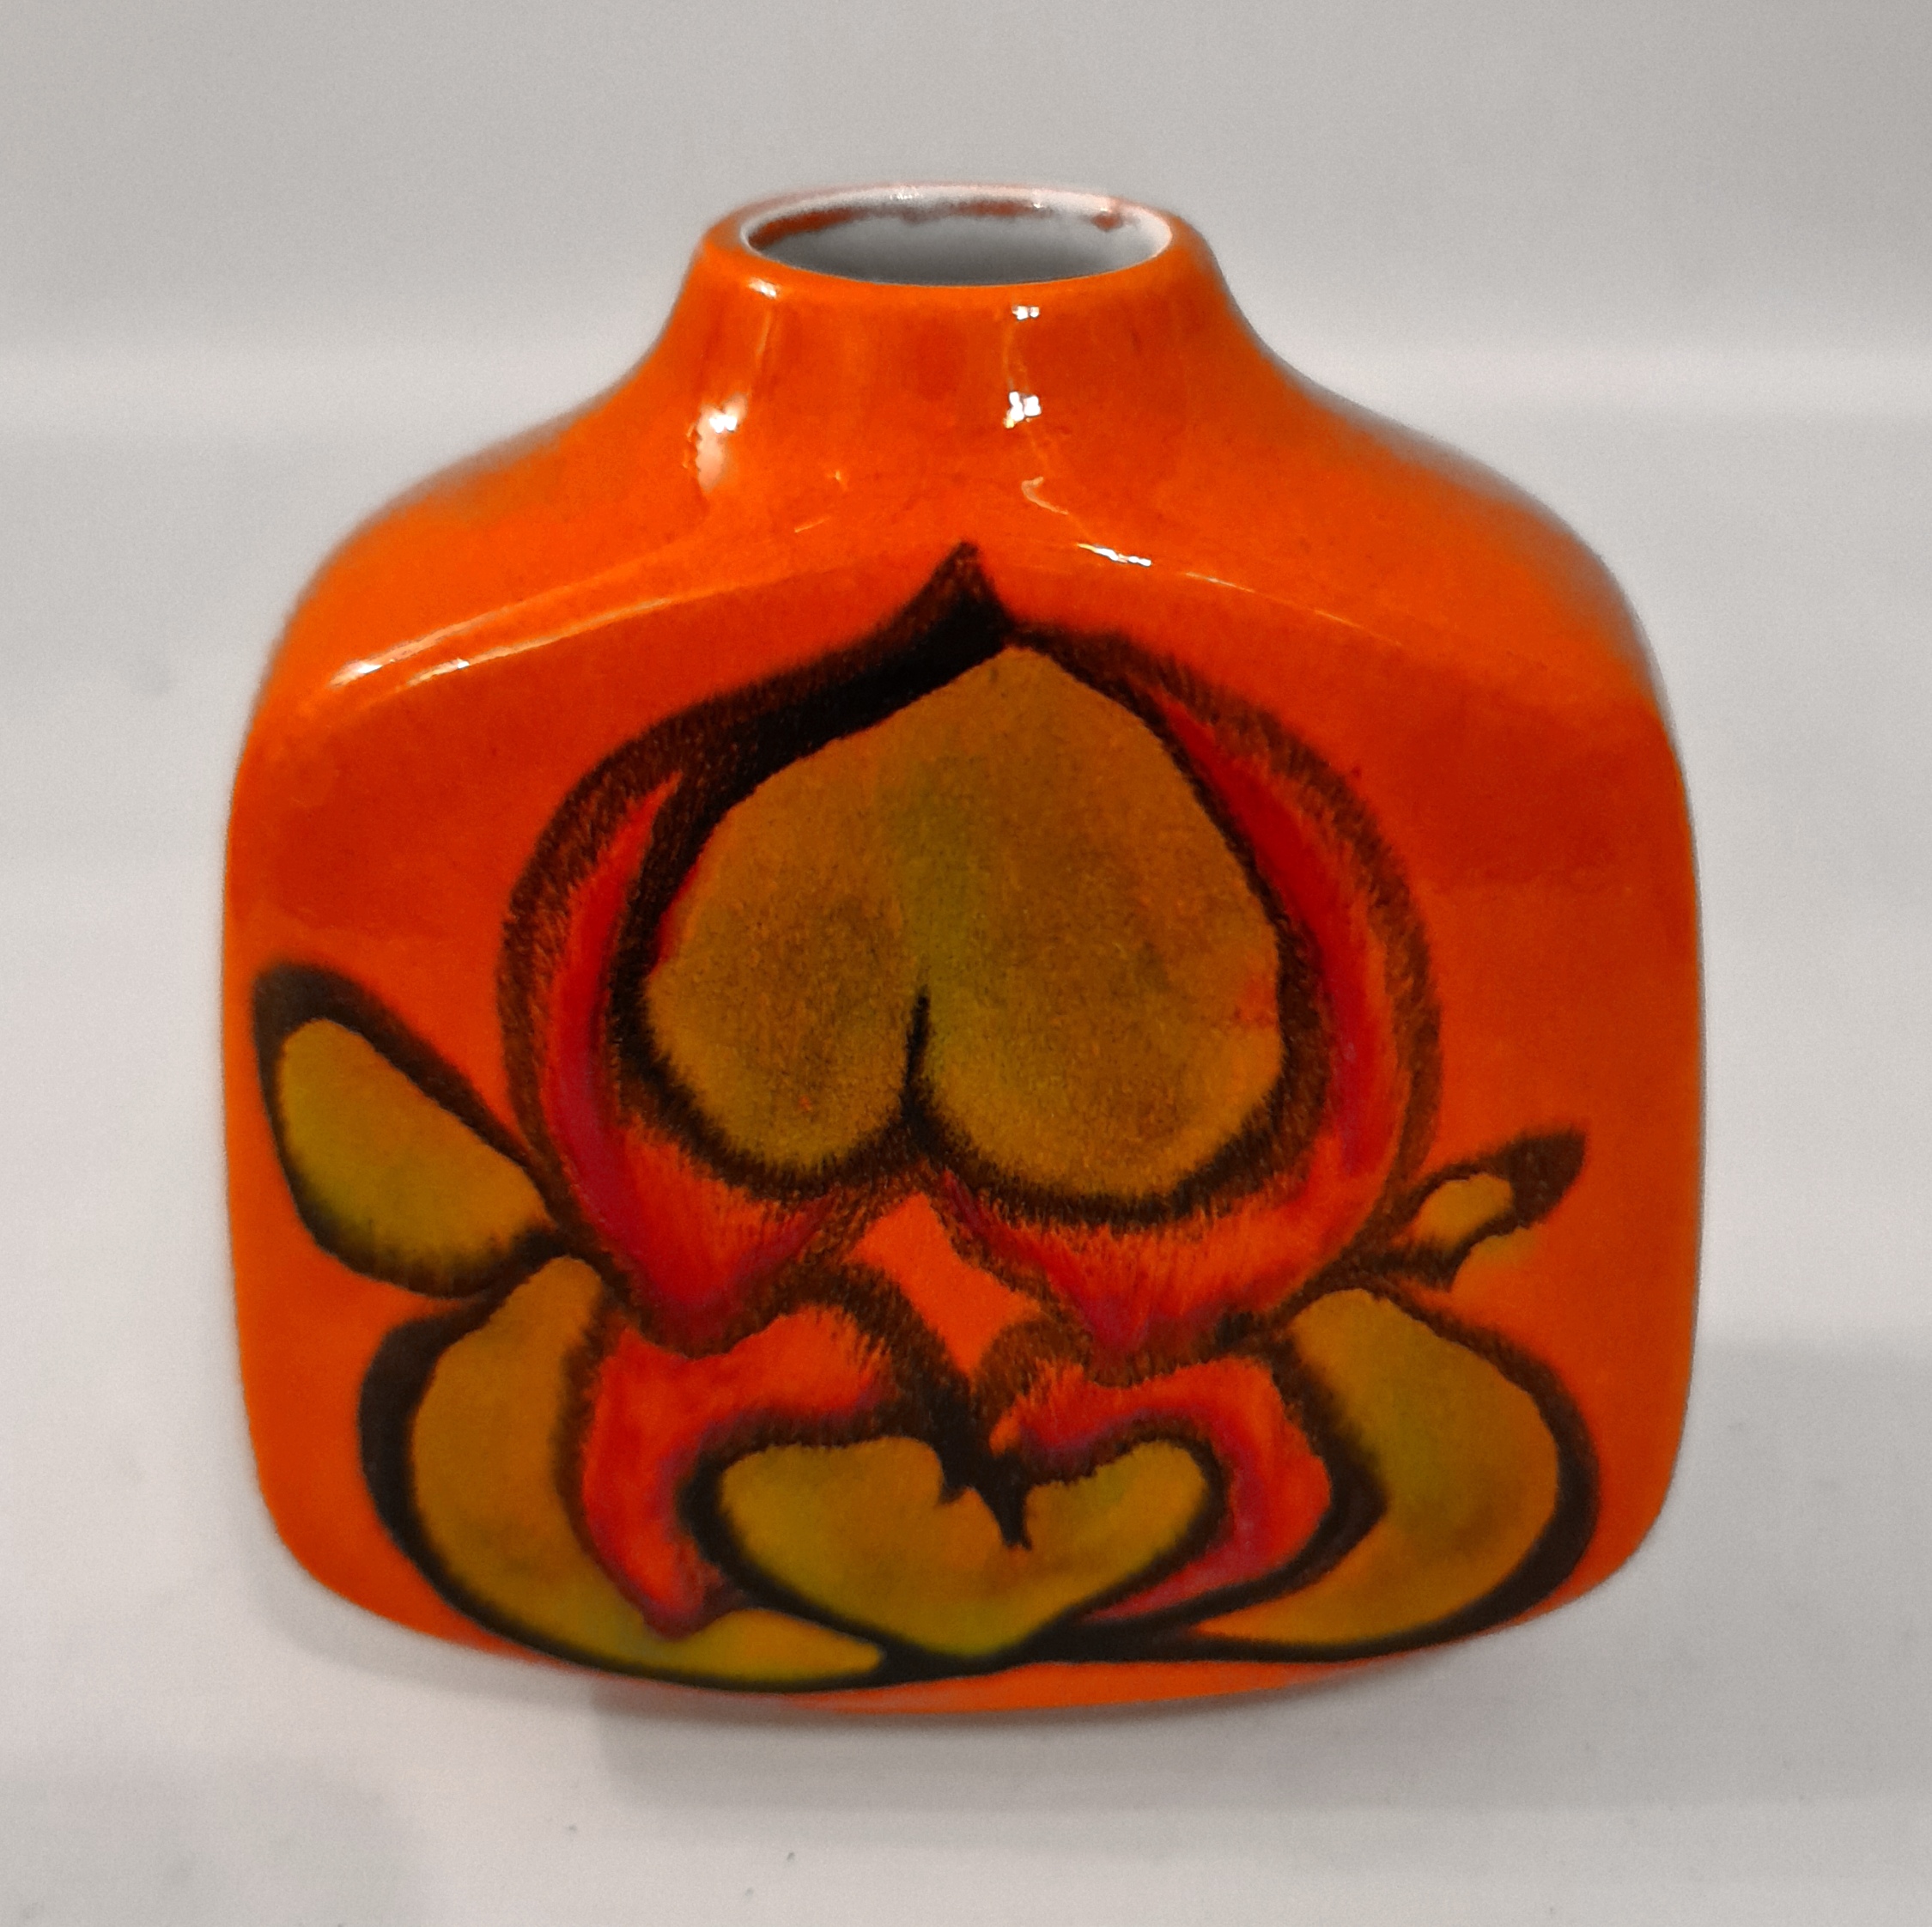 Vintage Poole Pottery Delphis Vase No. 35 Signed - Image 2 of 3